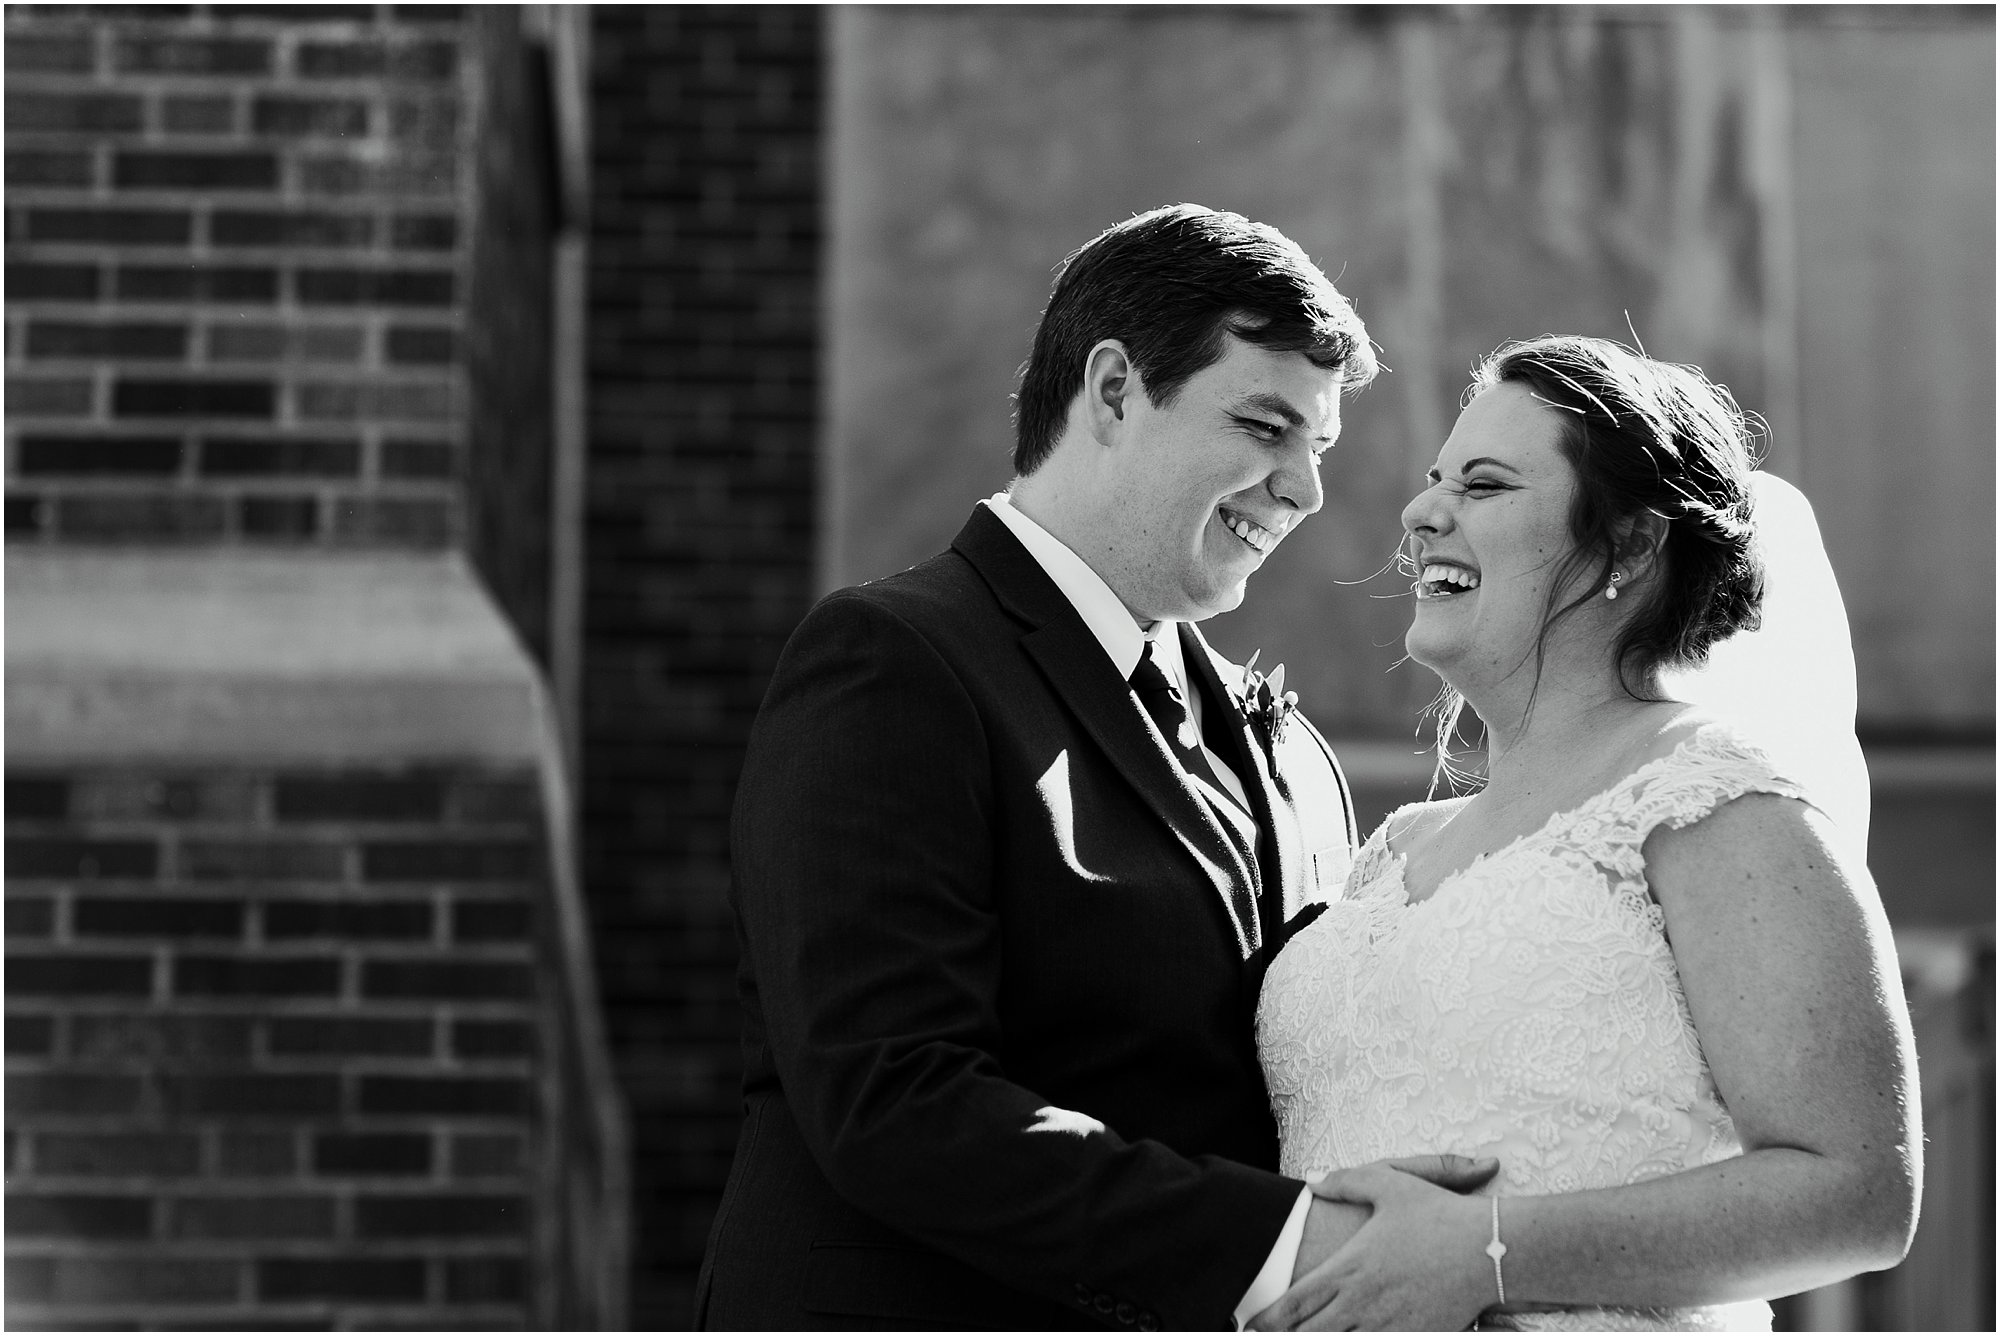 Bride and groom laughing together before their ceremony